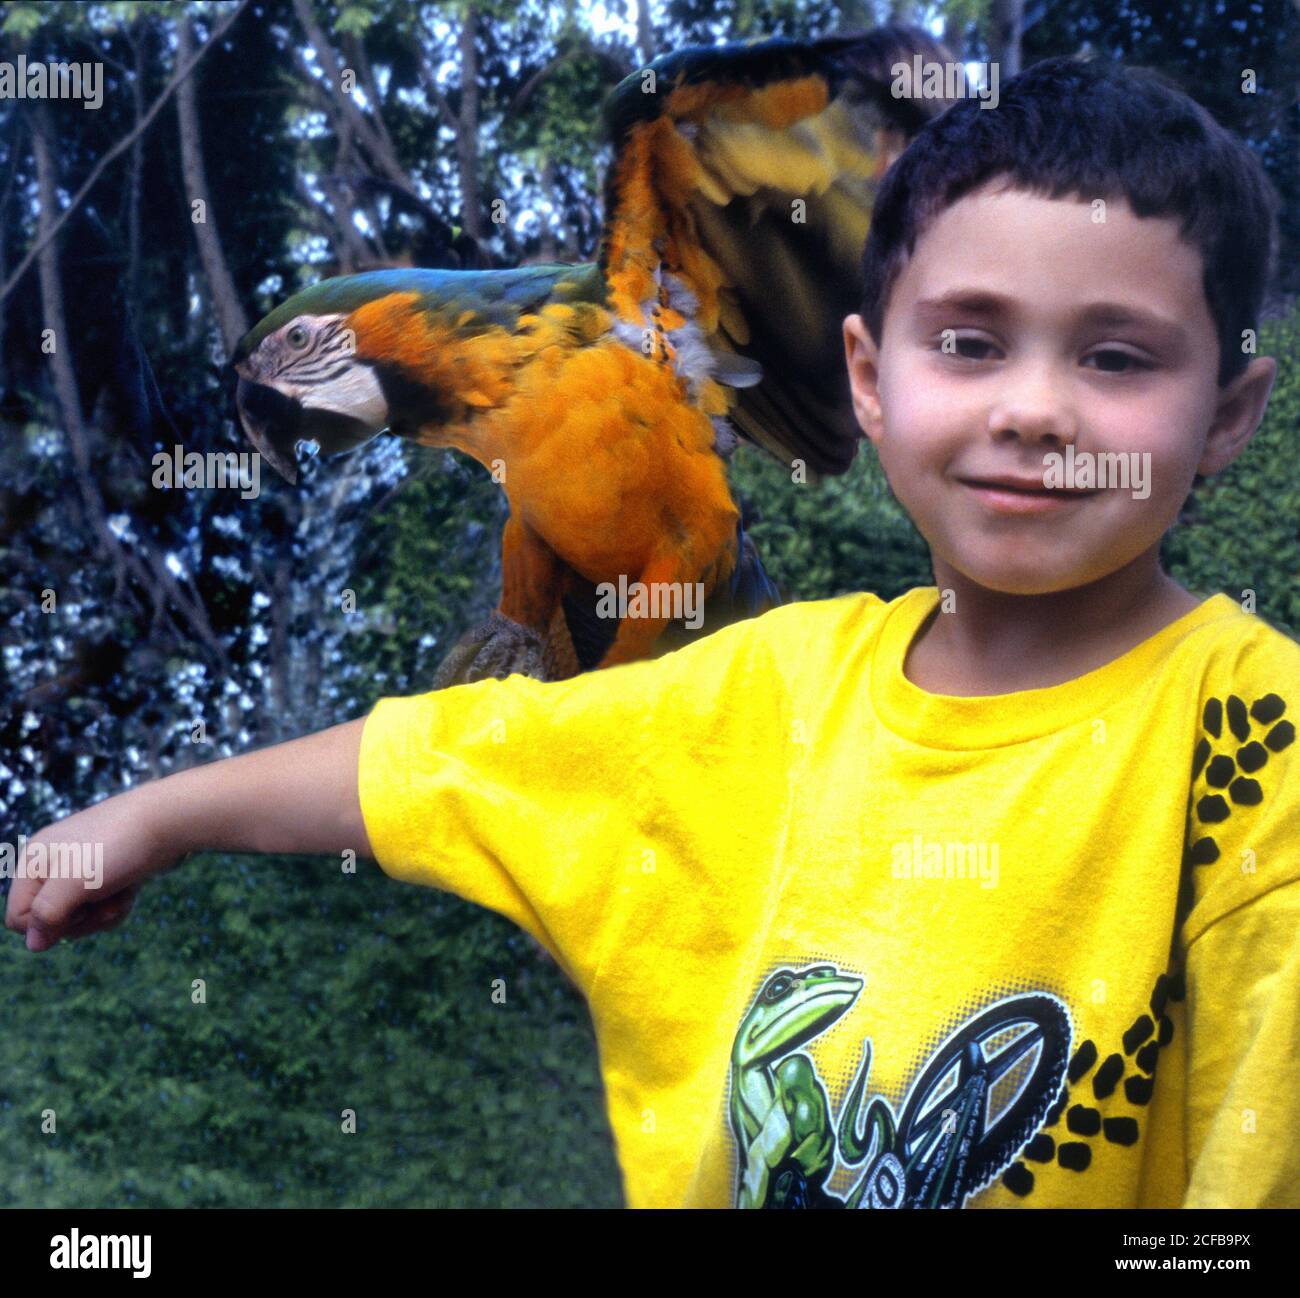 Young Boy with Parrot on arm Stock Photo